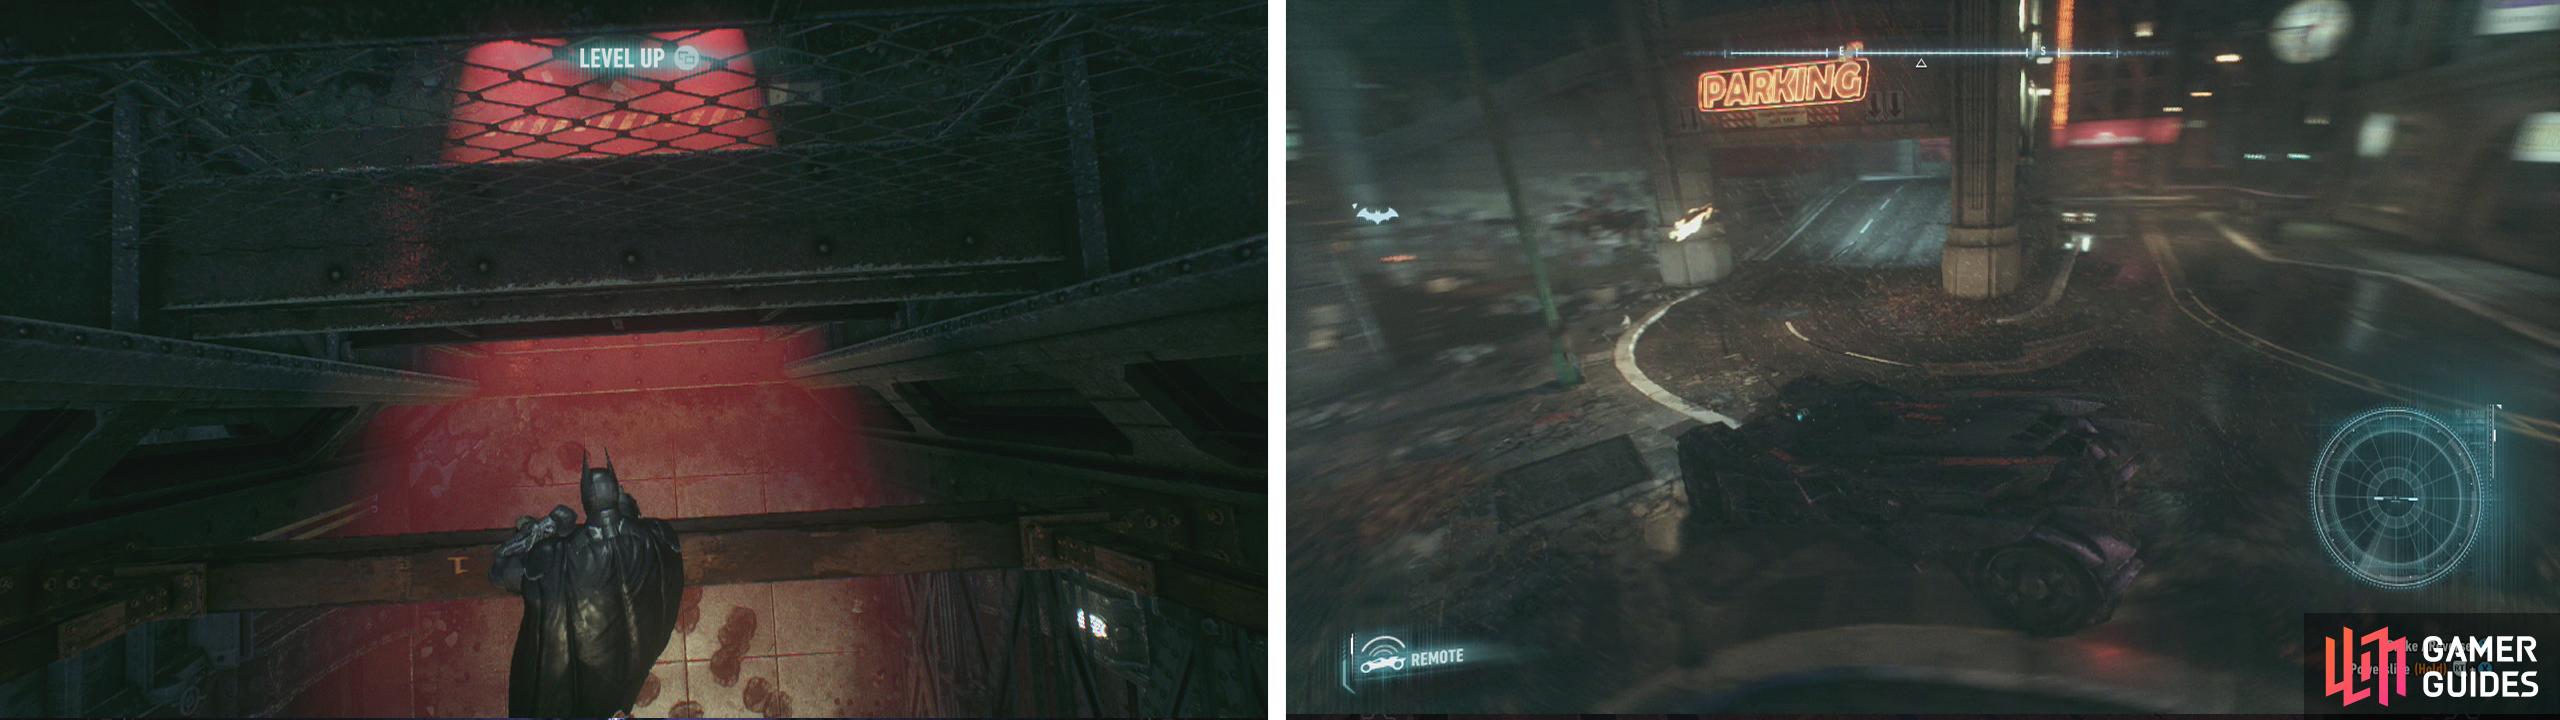 Upon returning to the roof, grapple up to the girders above (left). Use Remote Batmobile Control and dive to the top of the car park (right) to elimnate the ambushers.